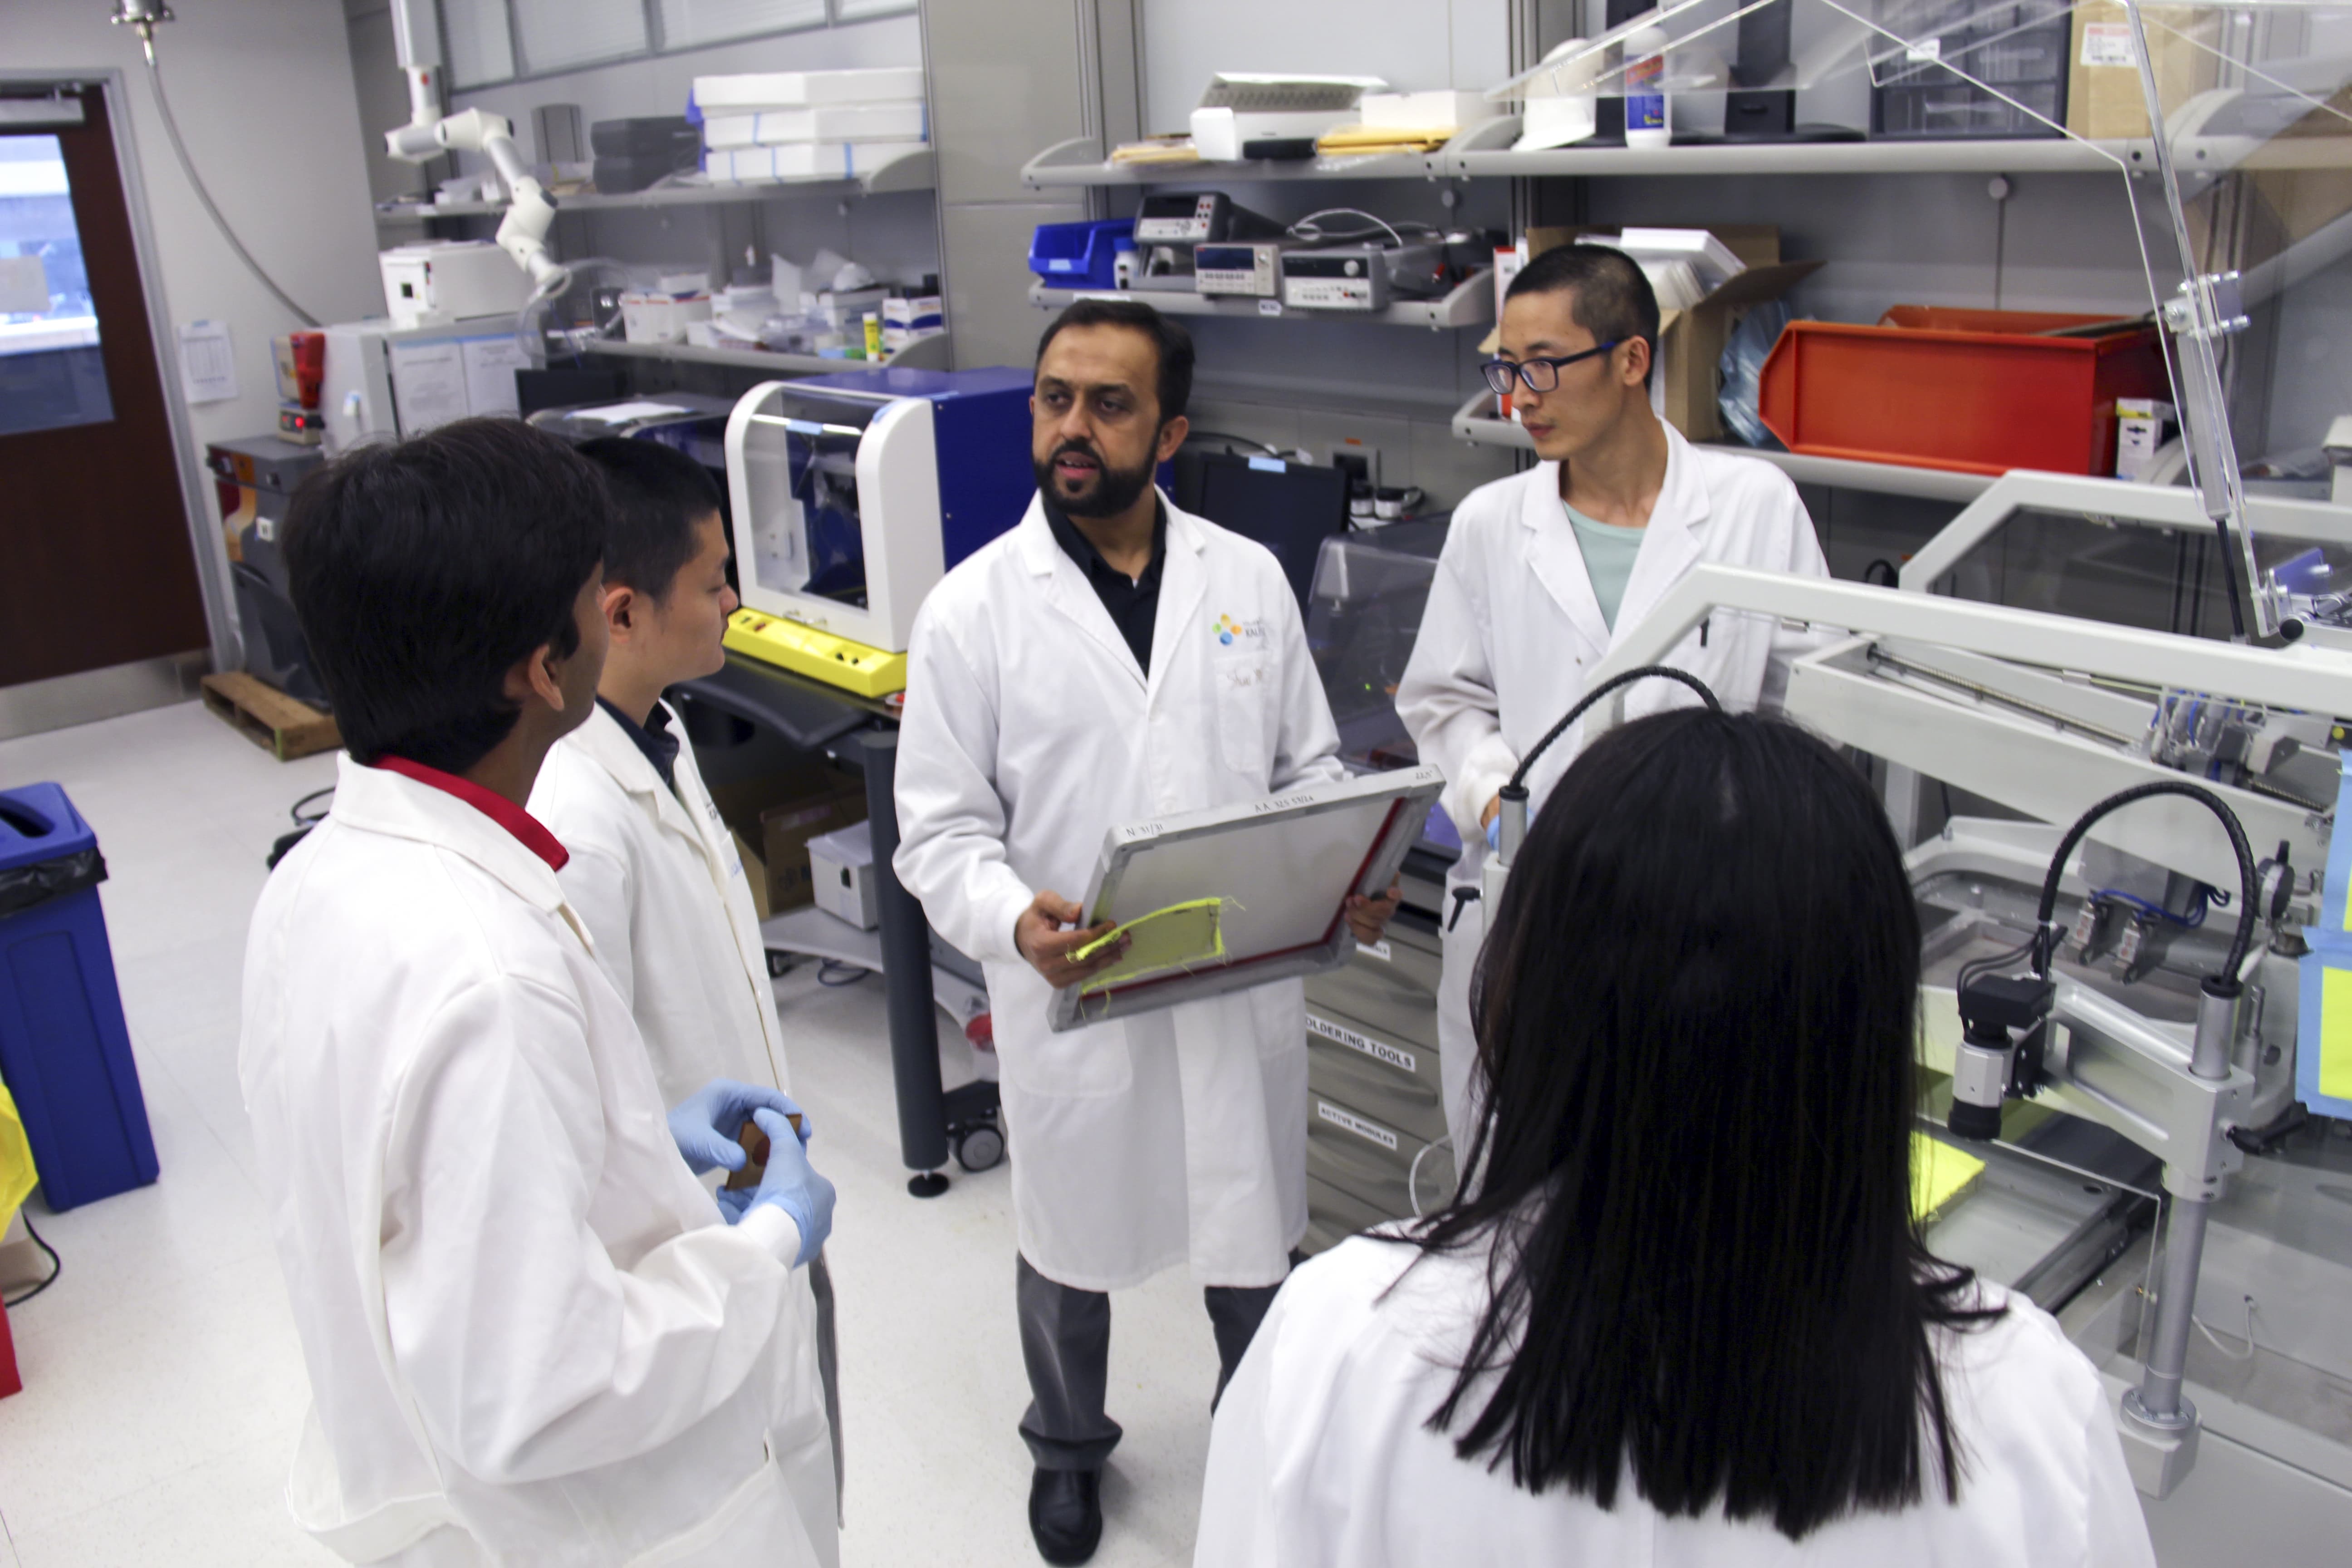 KAUST CEMSE EE IMPACT Prof Atif Shamim With His Research Group At IMPACT Lab